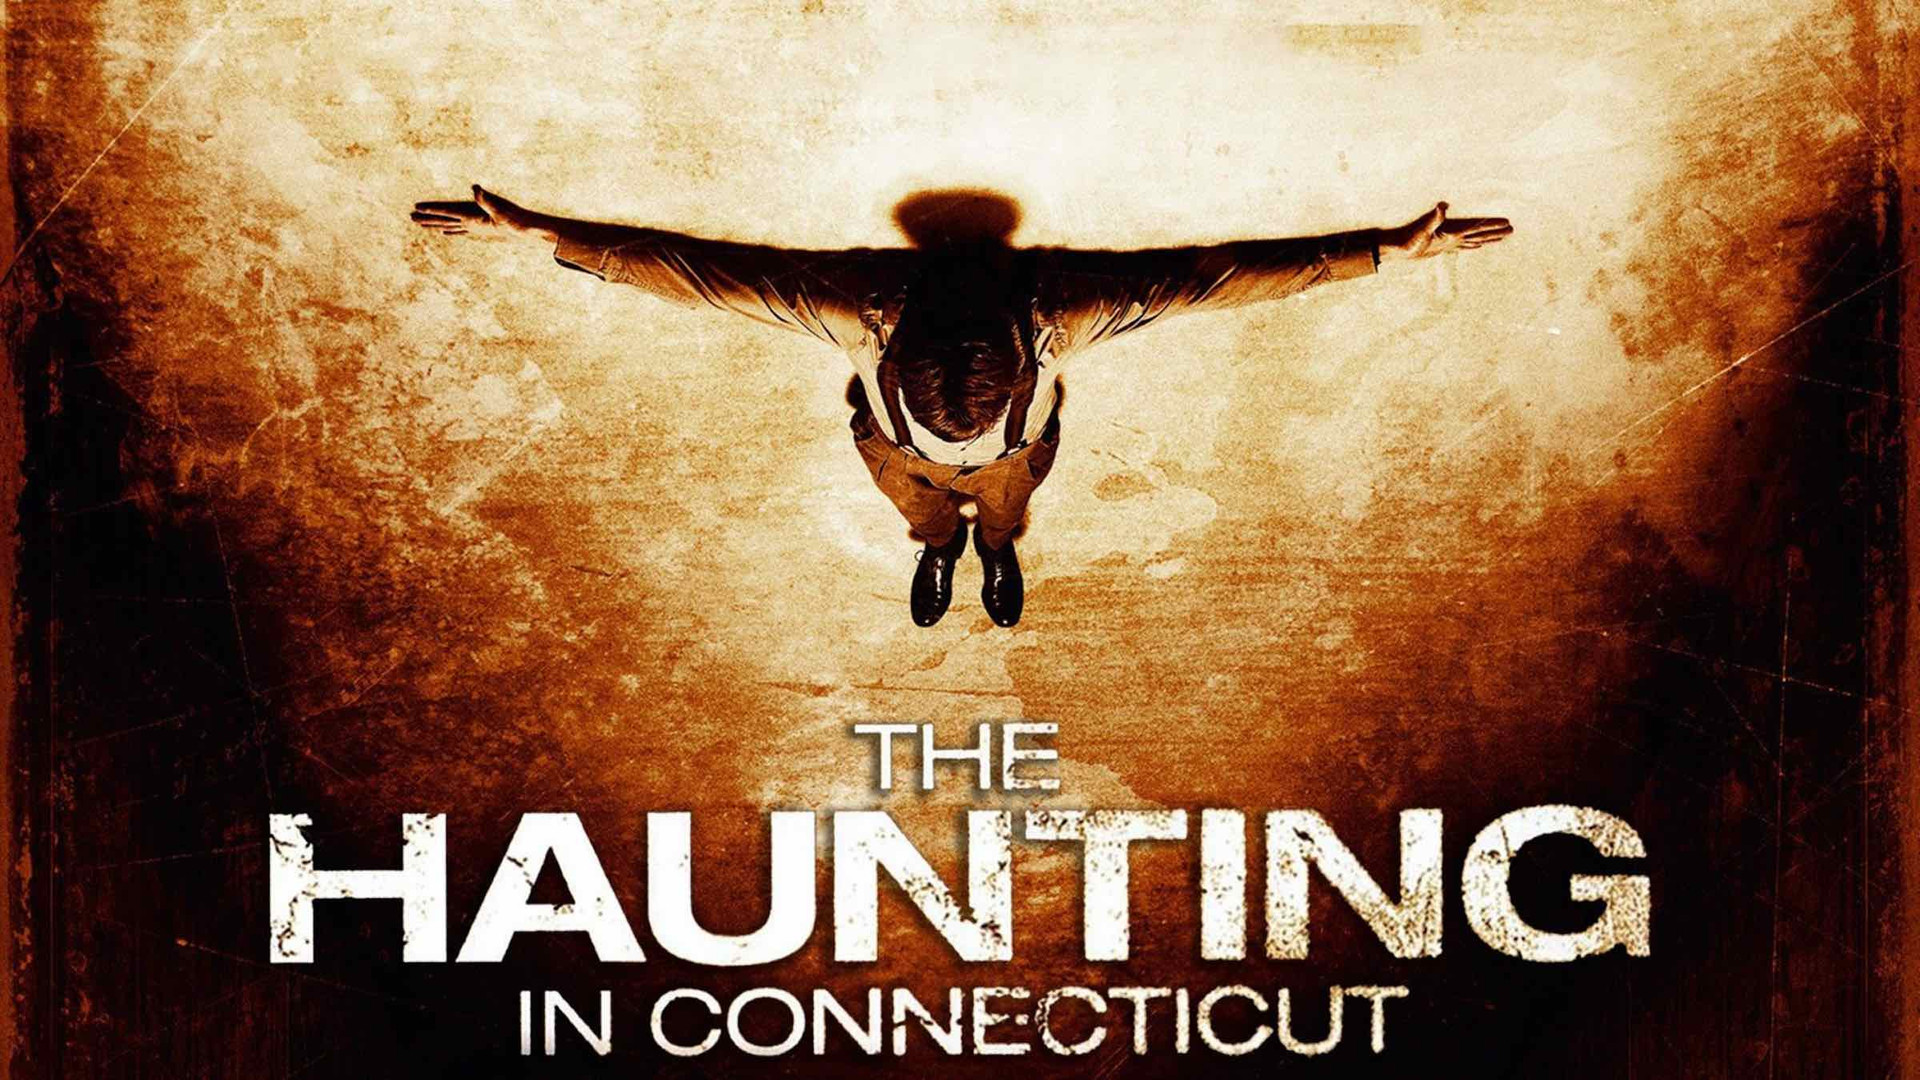 The Haunting in Connecticut (2009) - Grave Reviews - Horror Reviews